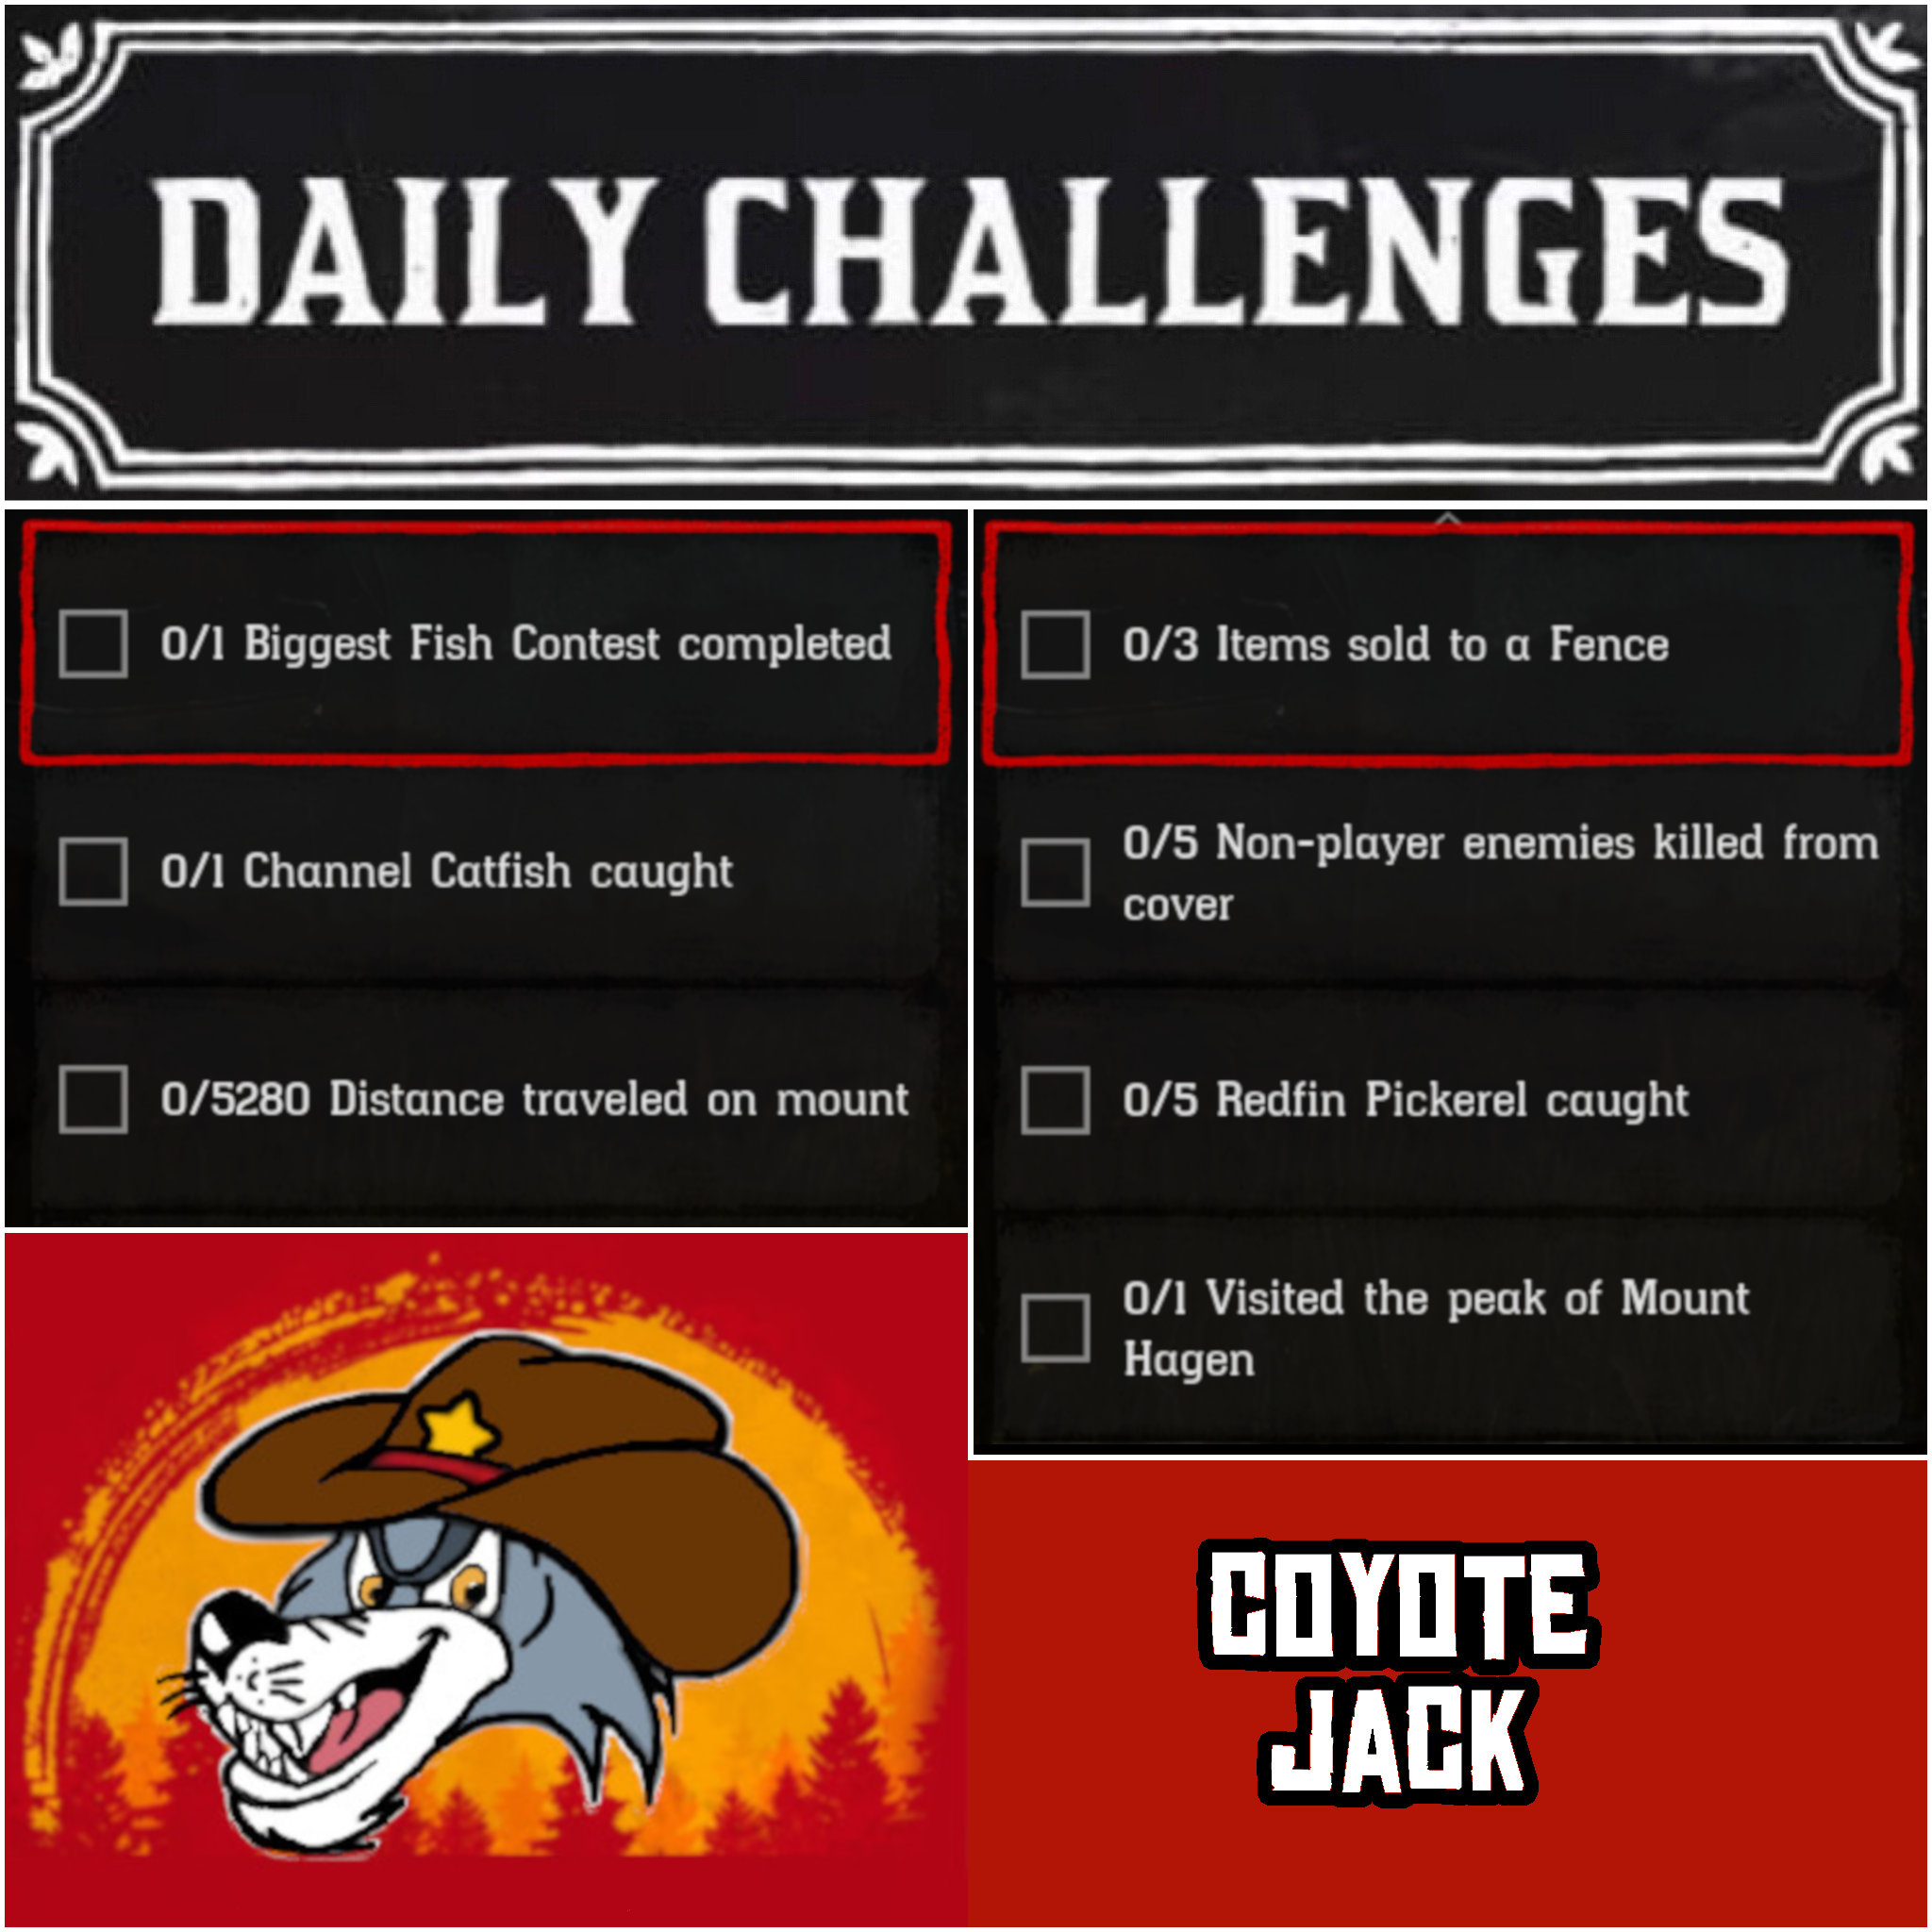 You are currently viewing Tuesday 02 March Daily Challenges